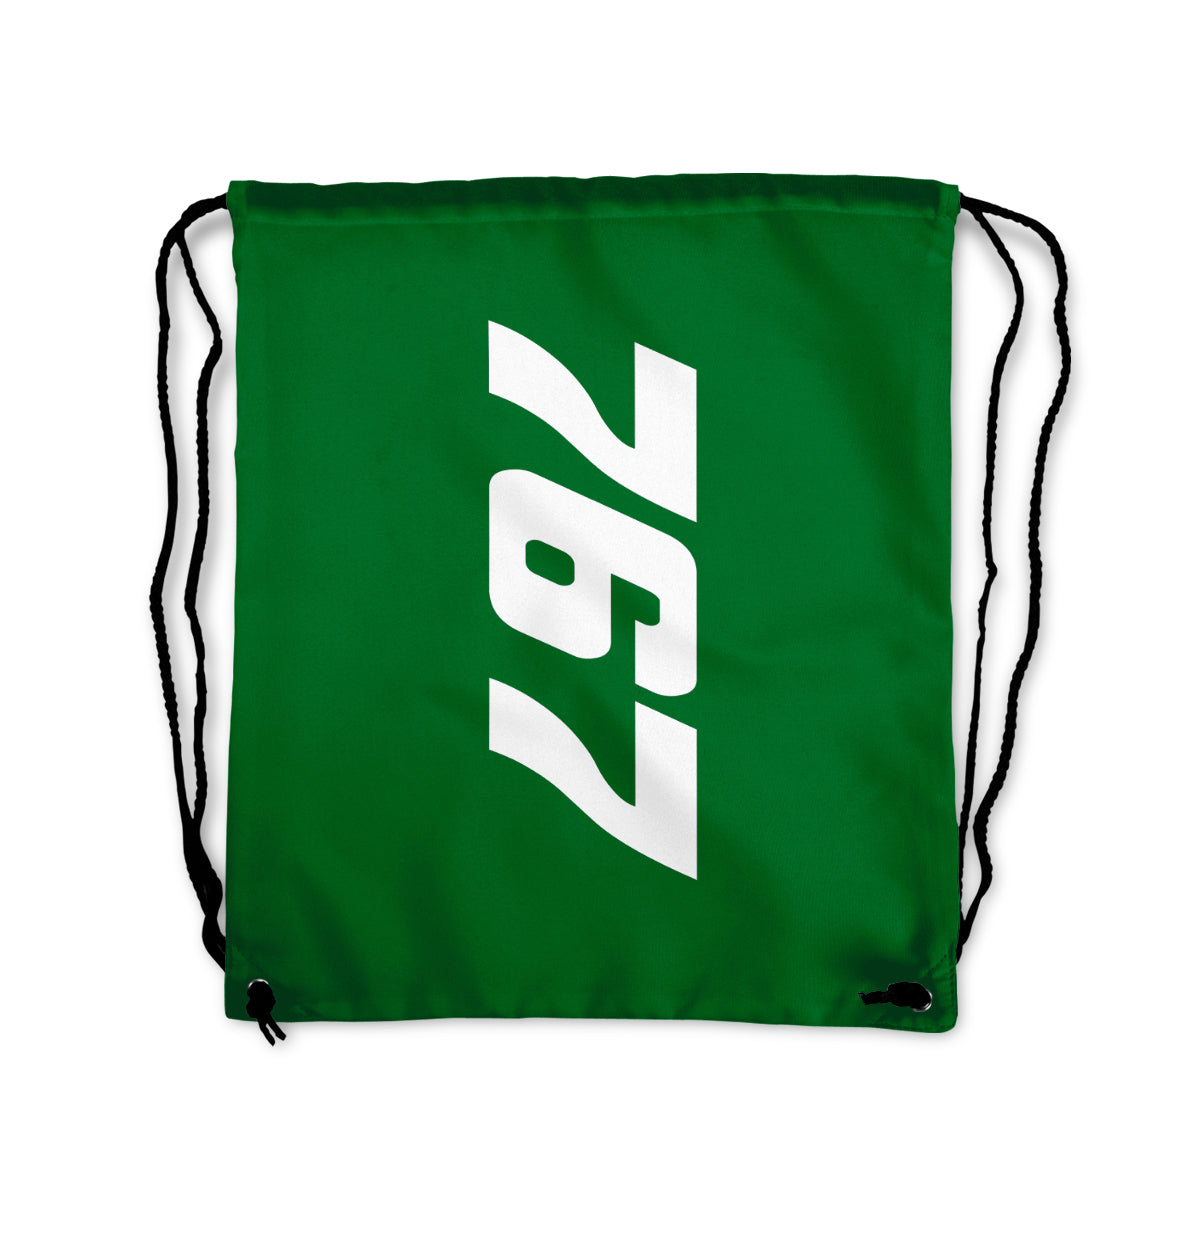 Boeing 767 Text Designed Drawstring Bags